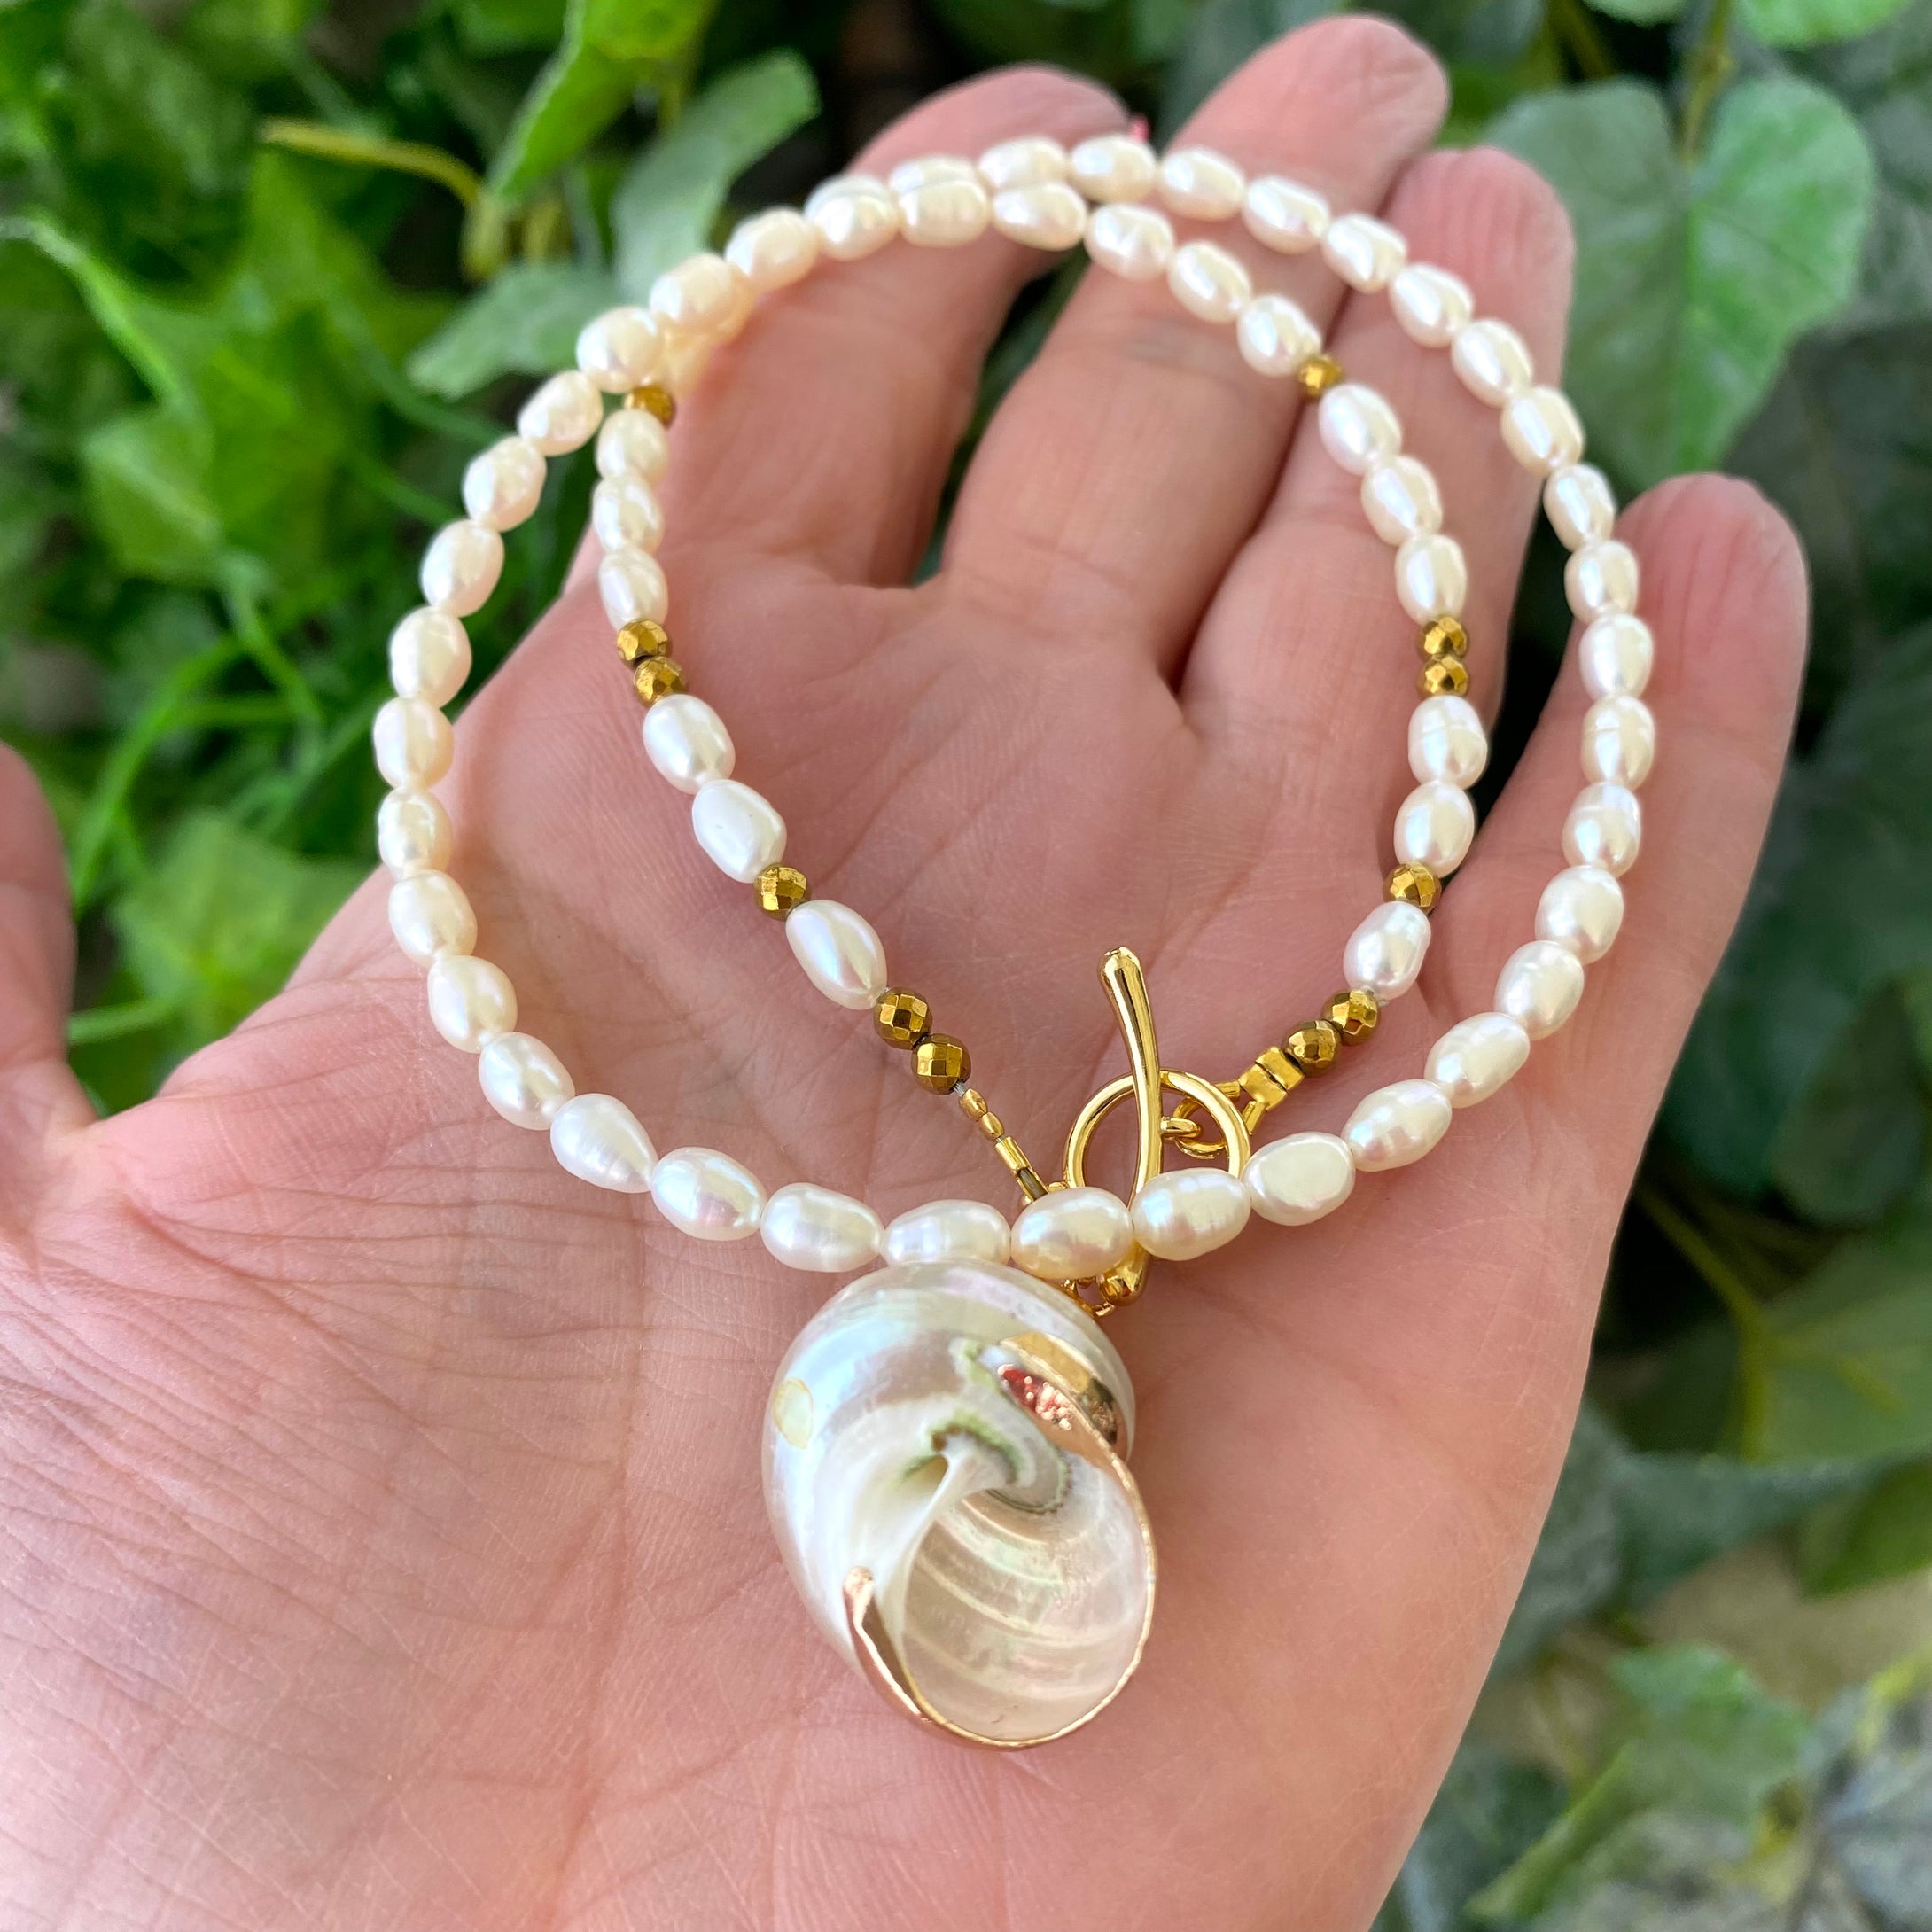 Small Shell Beads Bracelet, Jewelry Natural Shell Pearl